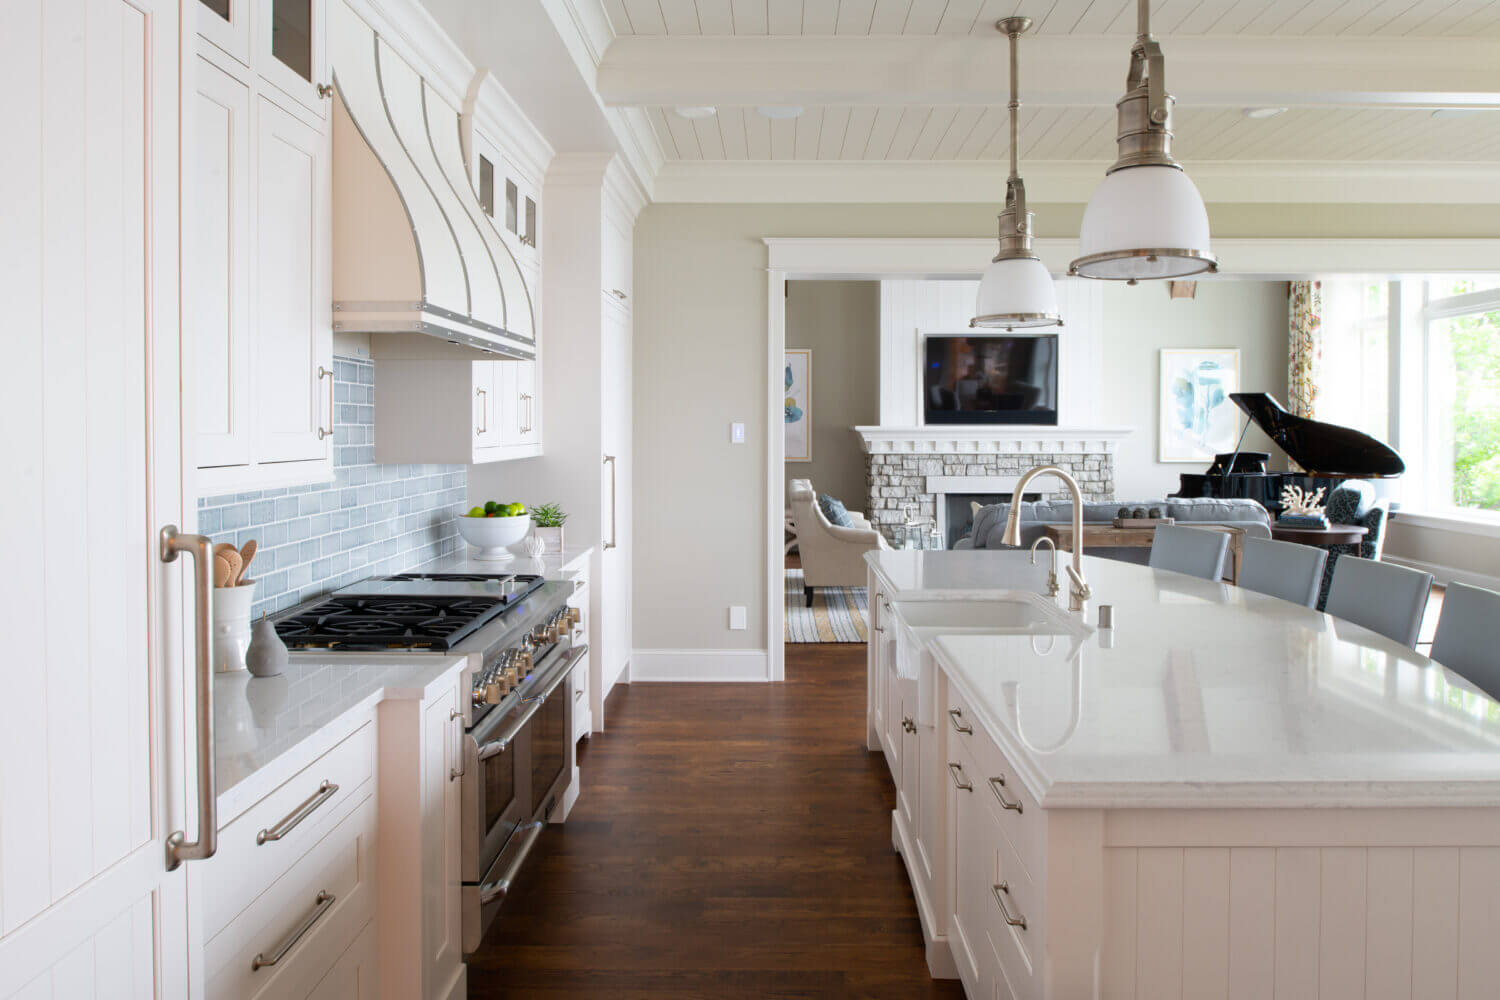 An East coast shingle styled kitchen with a symmetrical design using white painted inset cabinets and shiplap details.